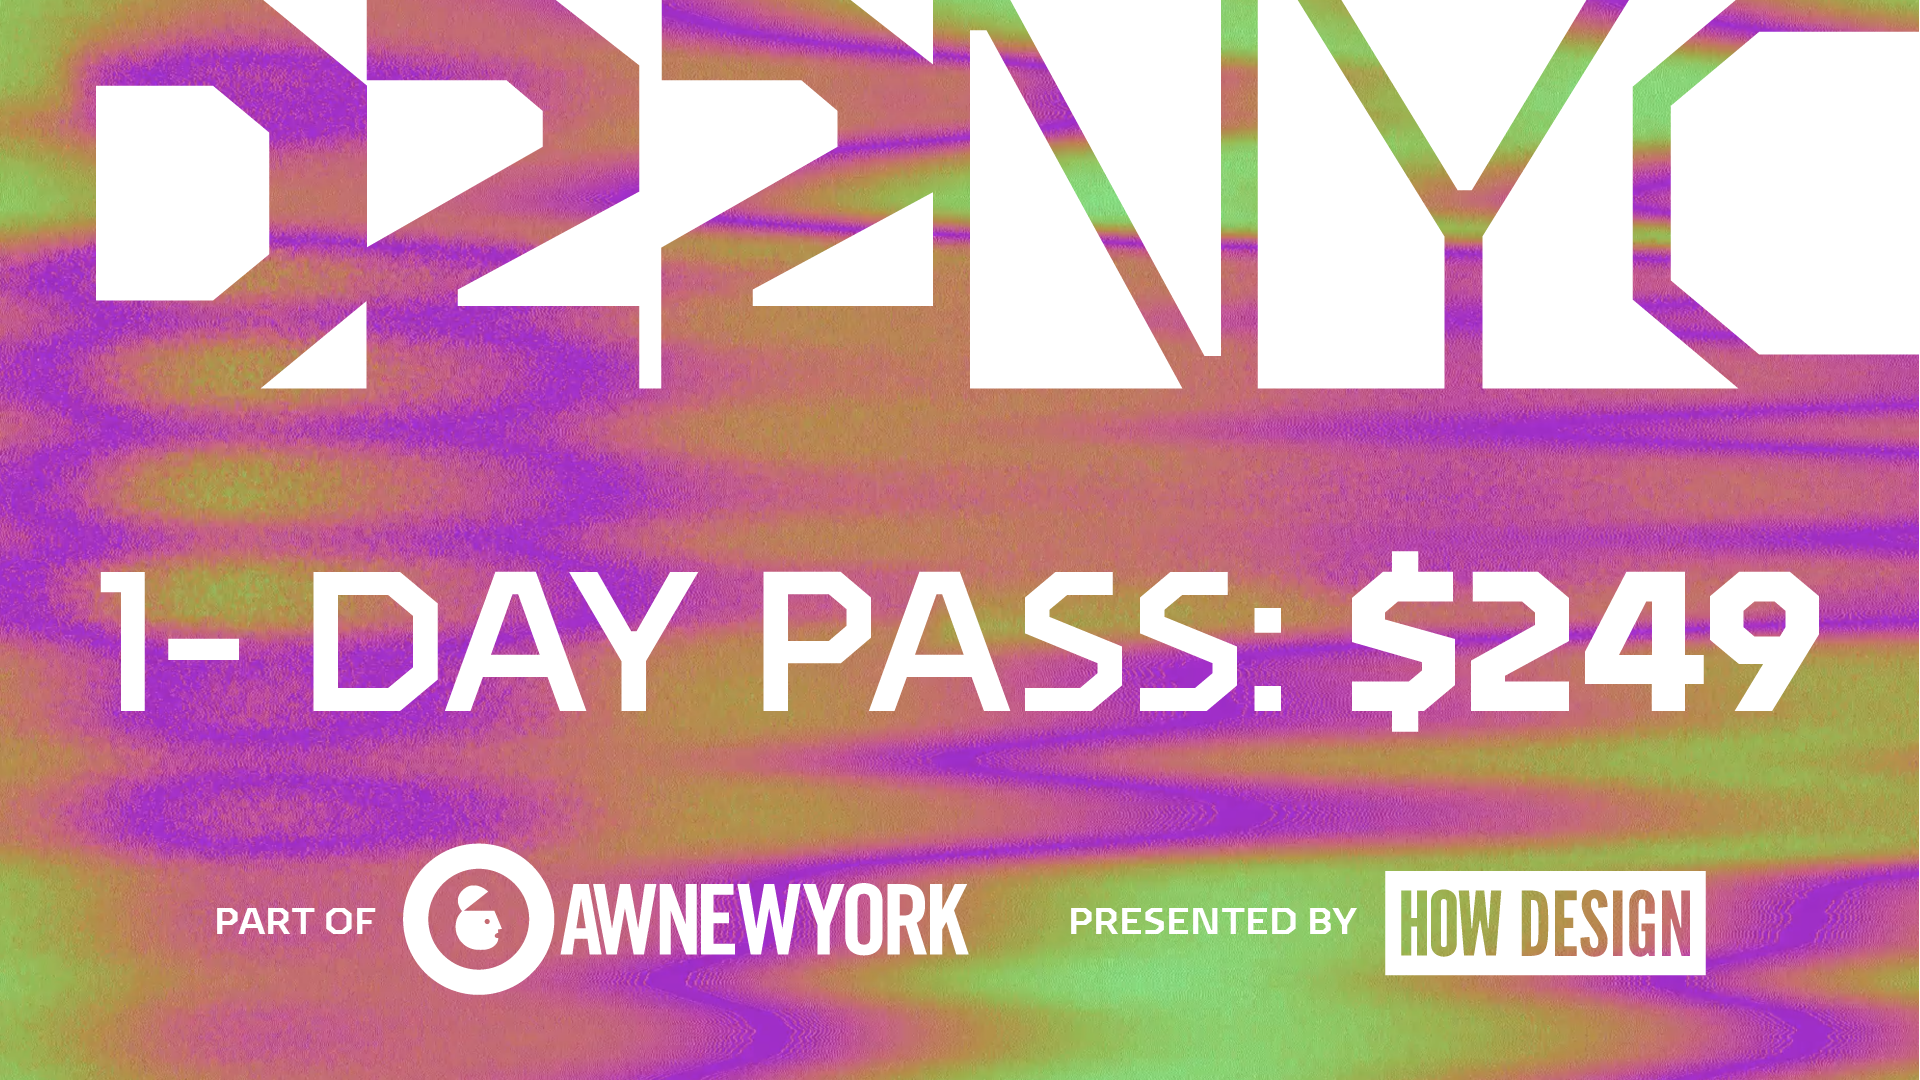 Join Us in NYC: 1-Day Passes Now Available!